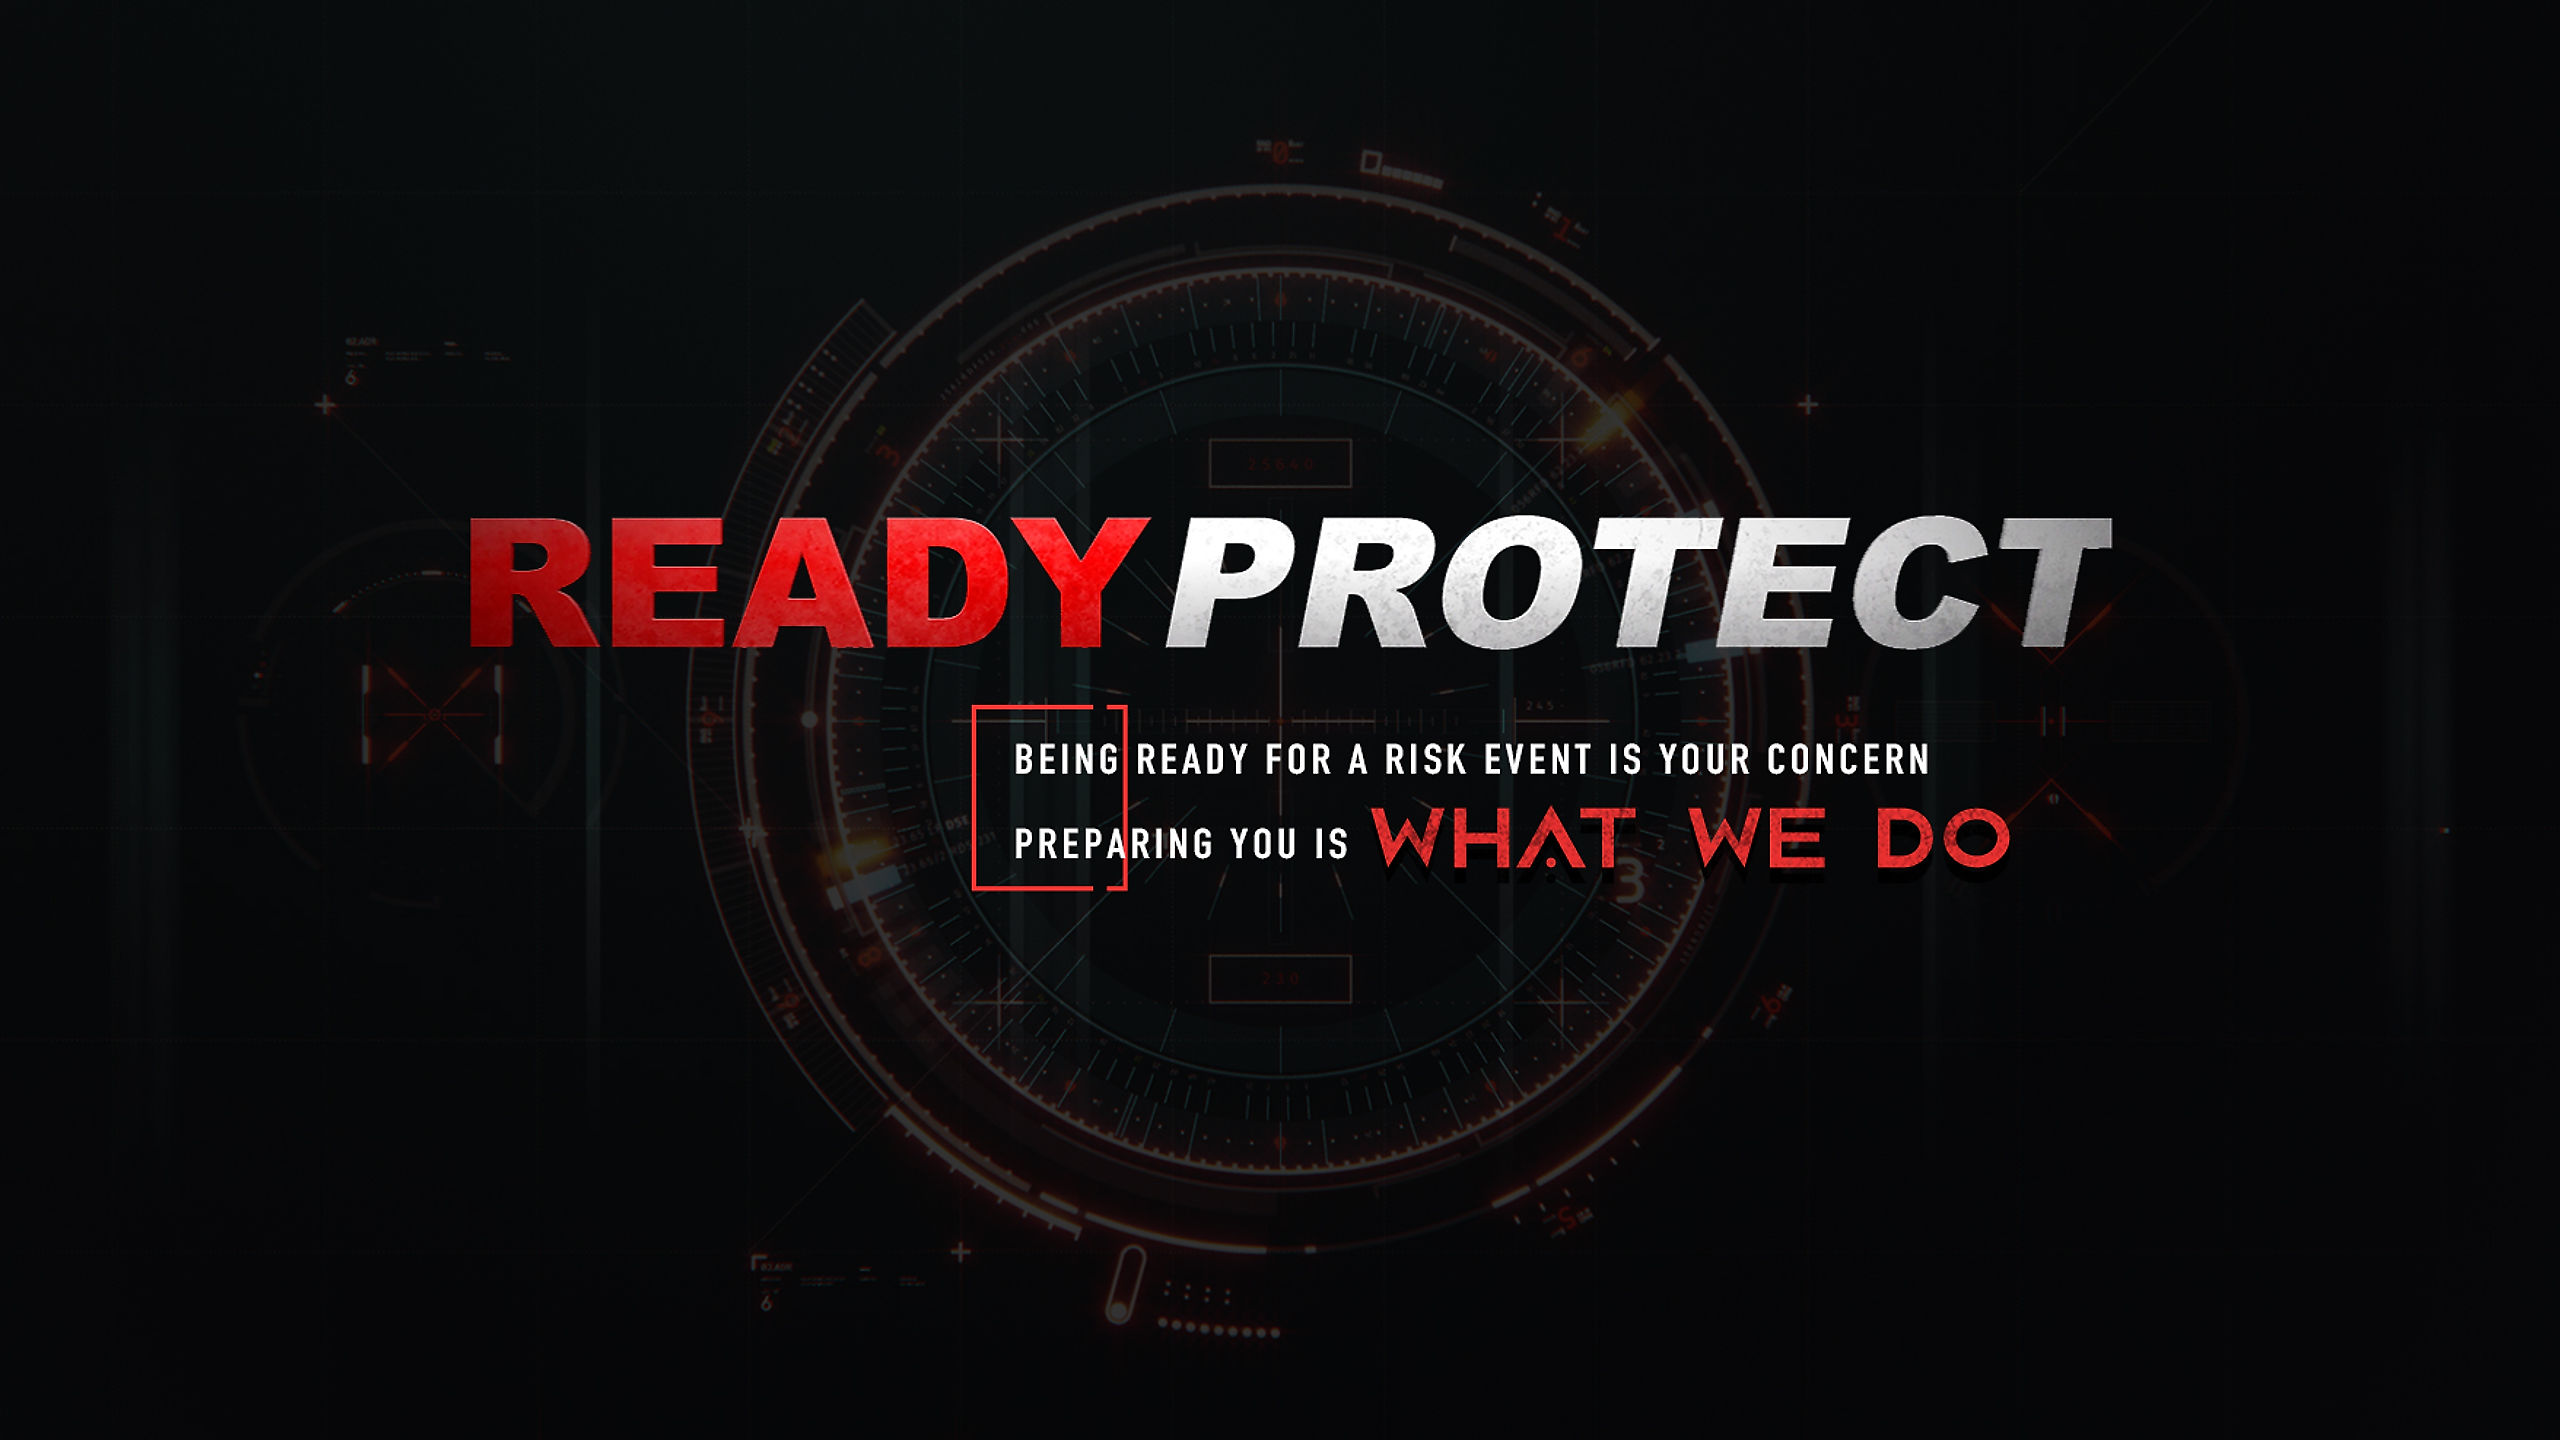 WHAT IS READY PROTECT?